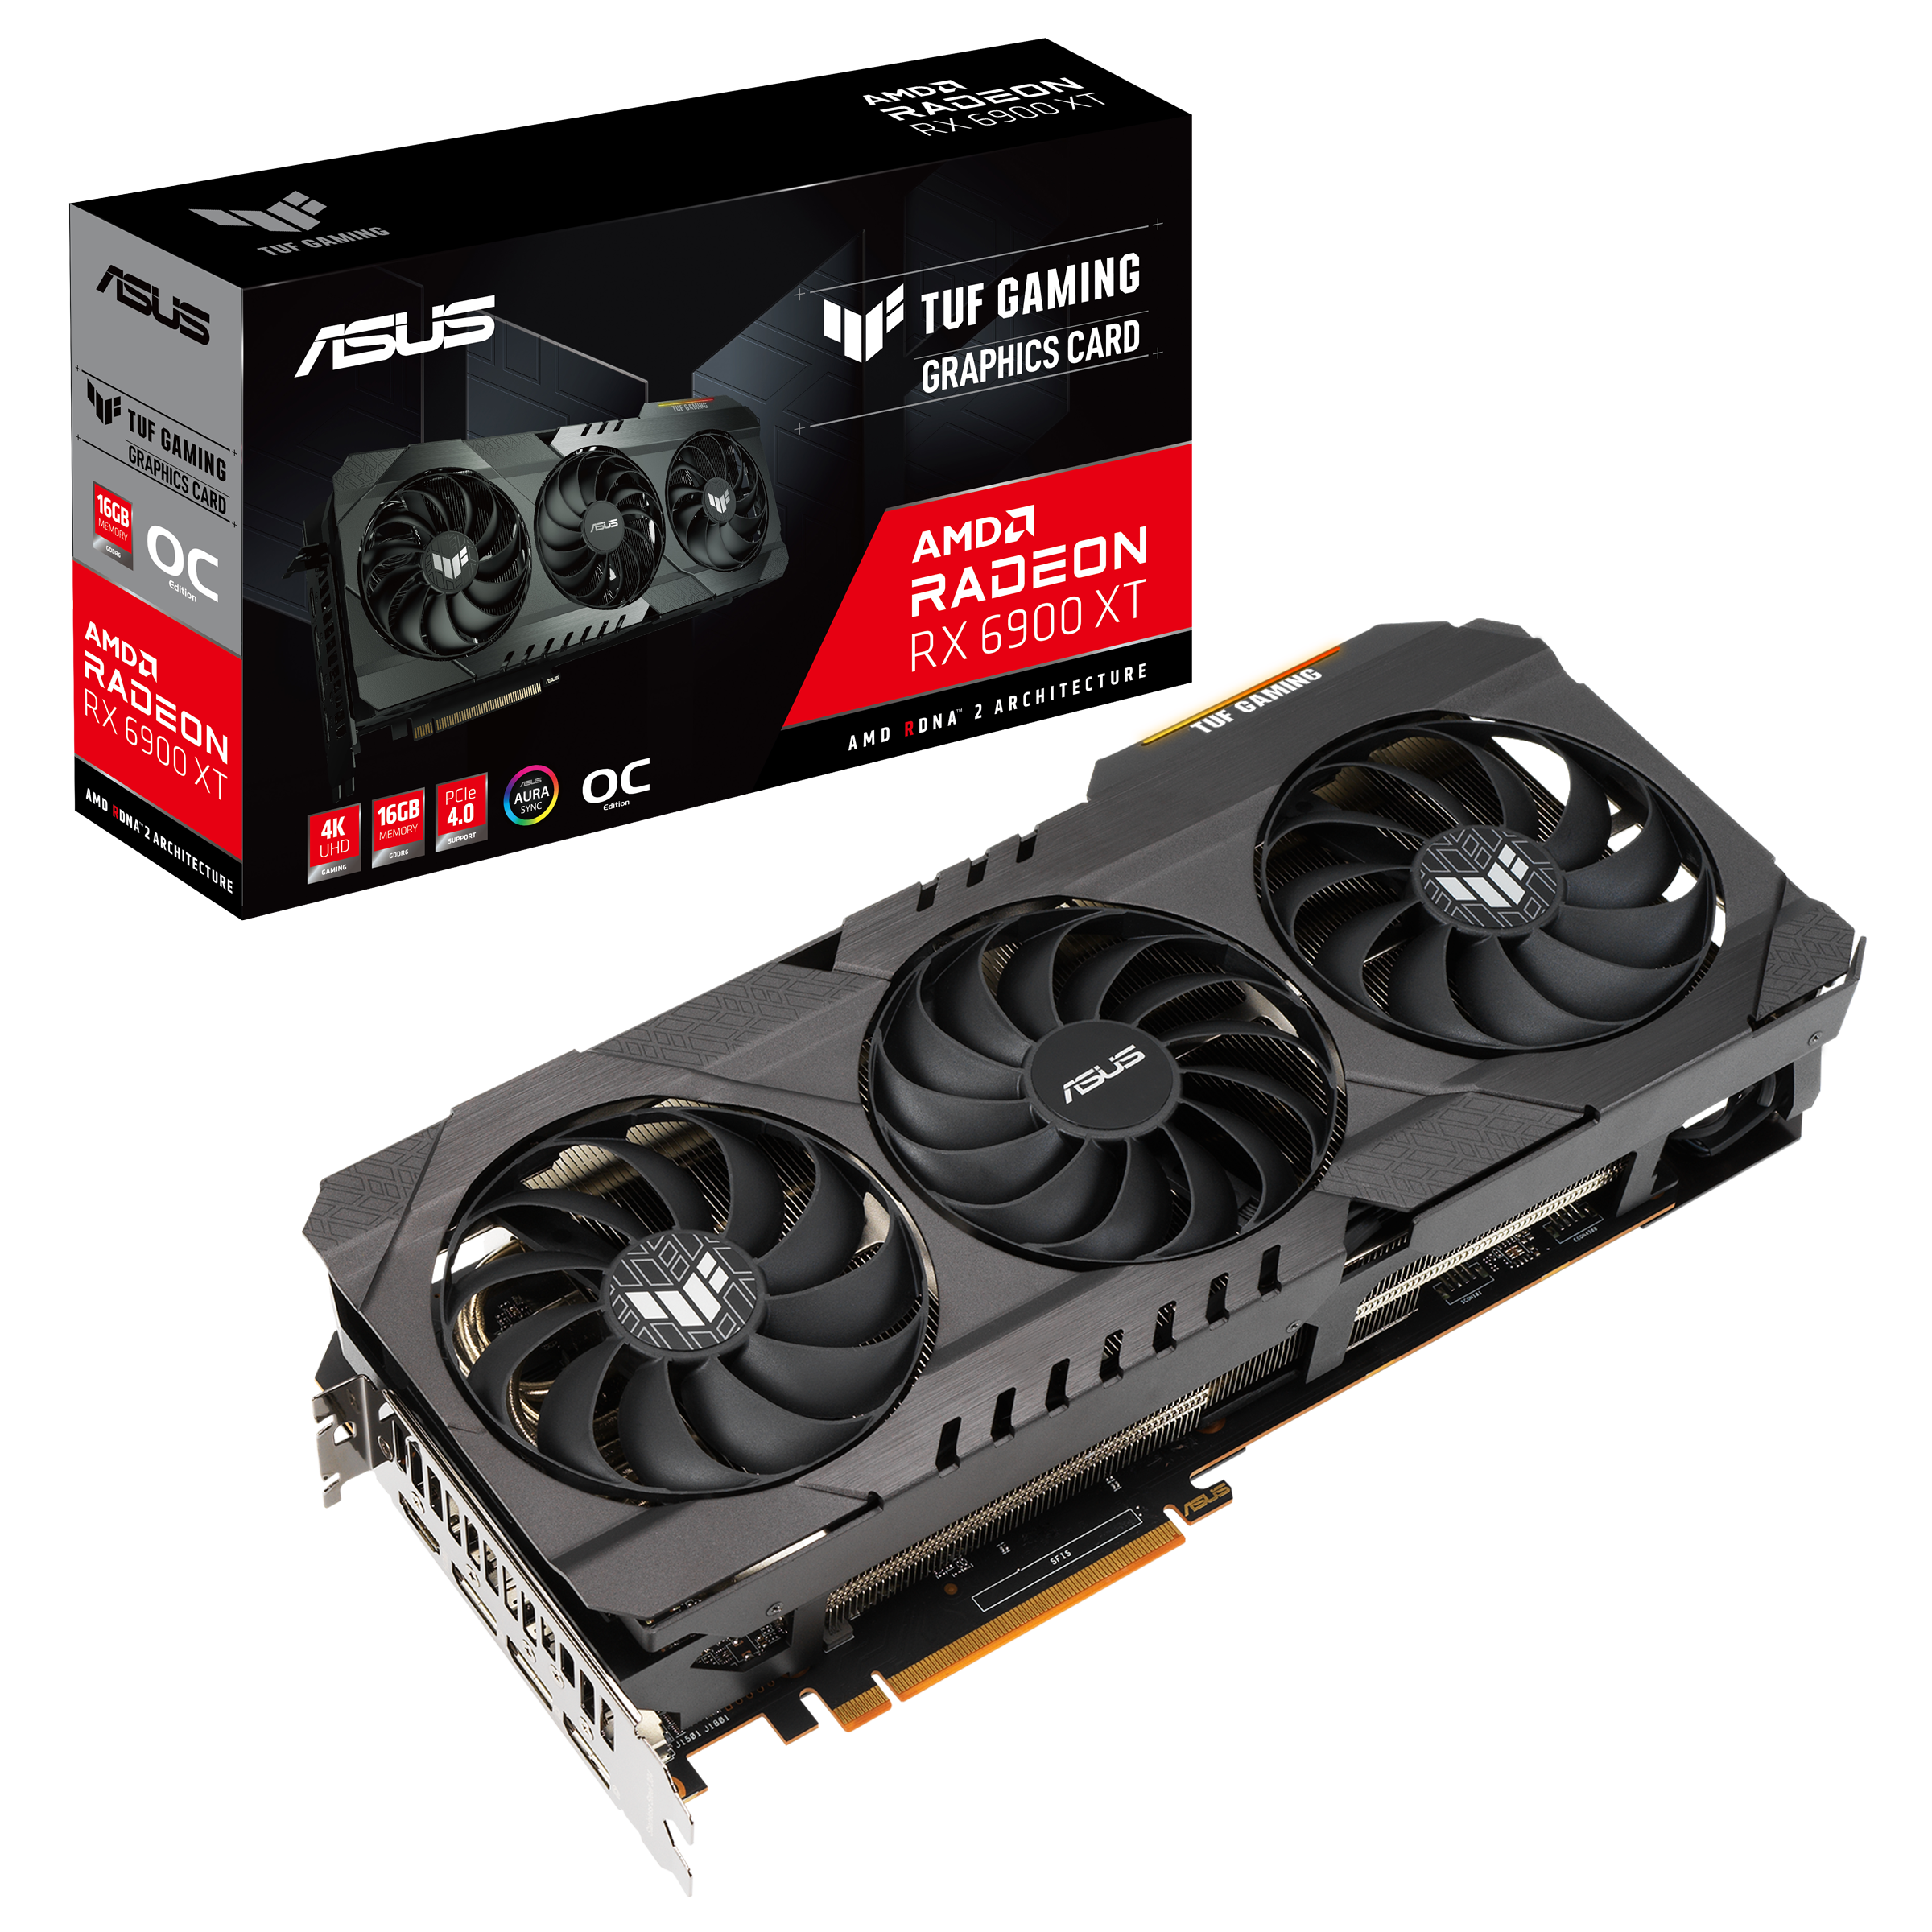 Media asset in full size related to 3dfxzone.it news item entitled as follows: ASUS lancia a sorpresa la video card TUF Gaming Radeon RX 6900 XT | Image Name: news31420_ASUS-TUF-Gaming-Radeon-RX-6900-XT_4.png